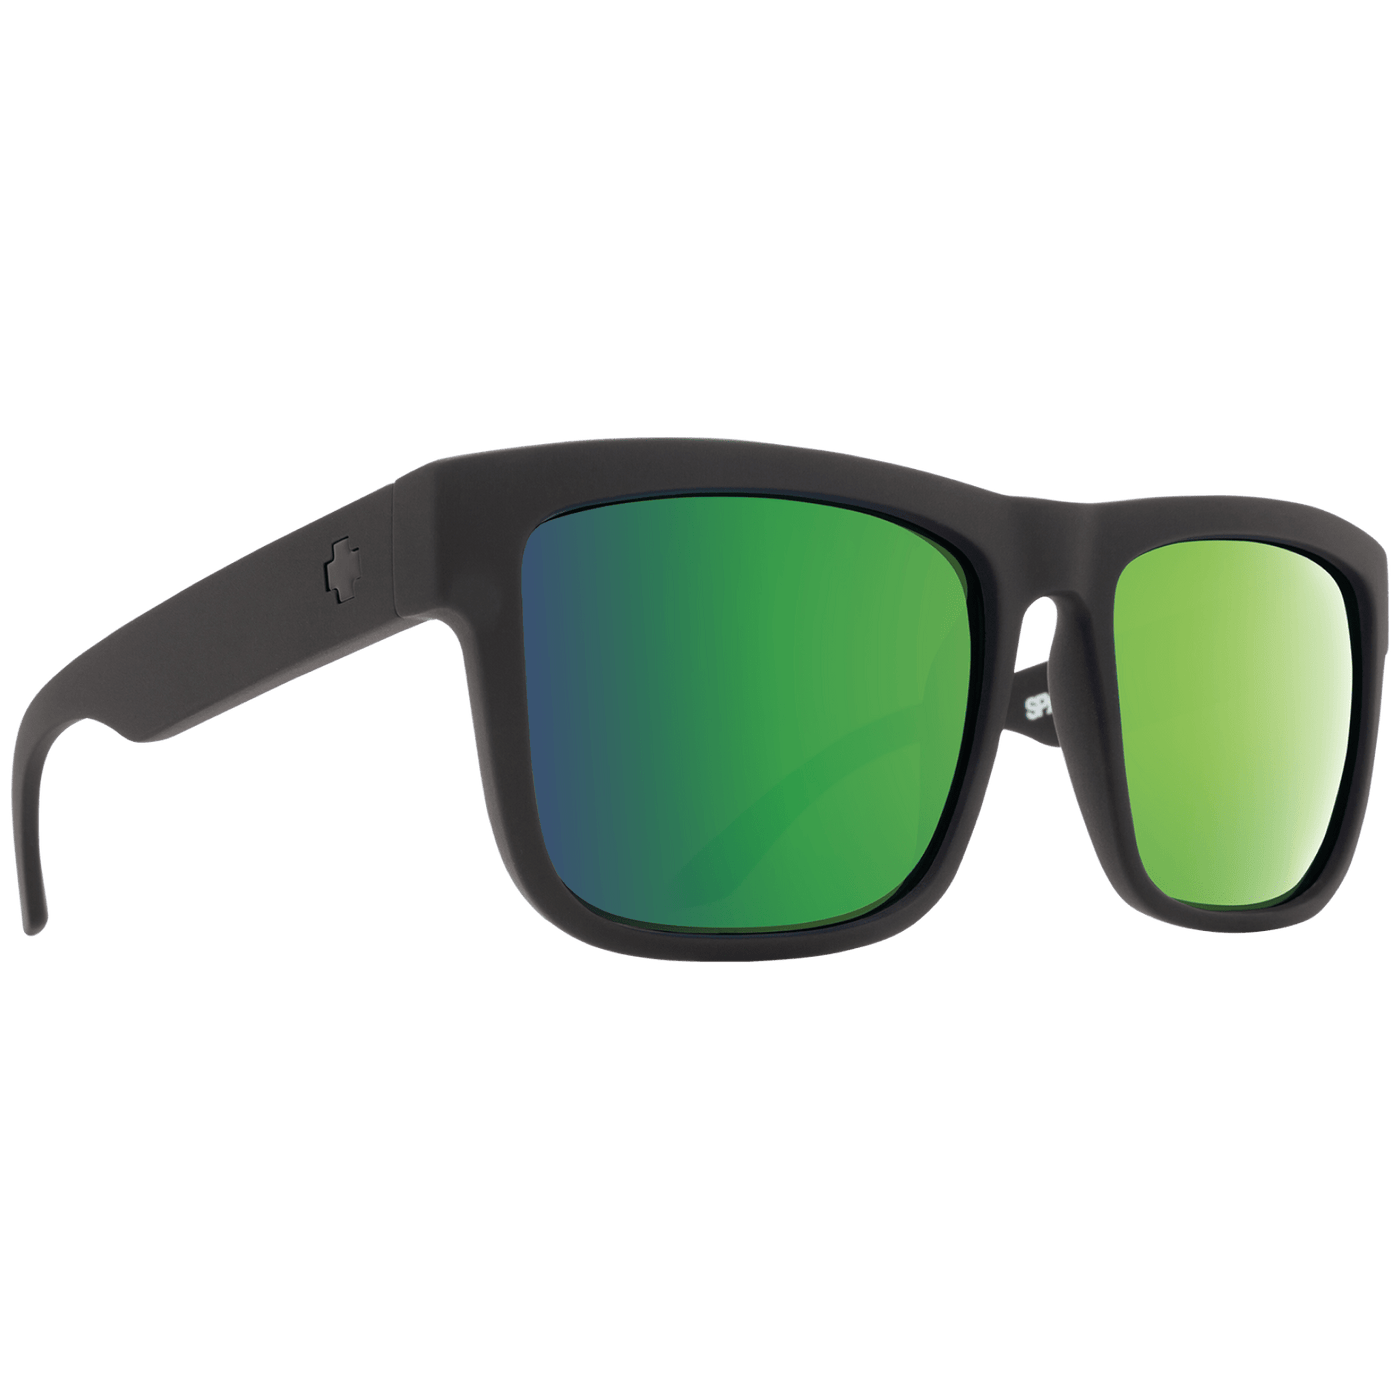 SPY Happy Lens DISCORD Polarized Sunglasses - Green 8Lines Shop - Fast Shipping